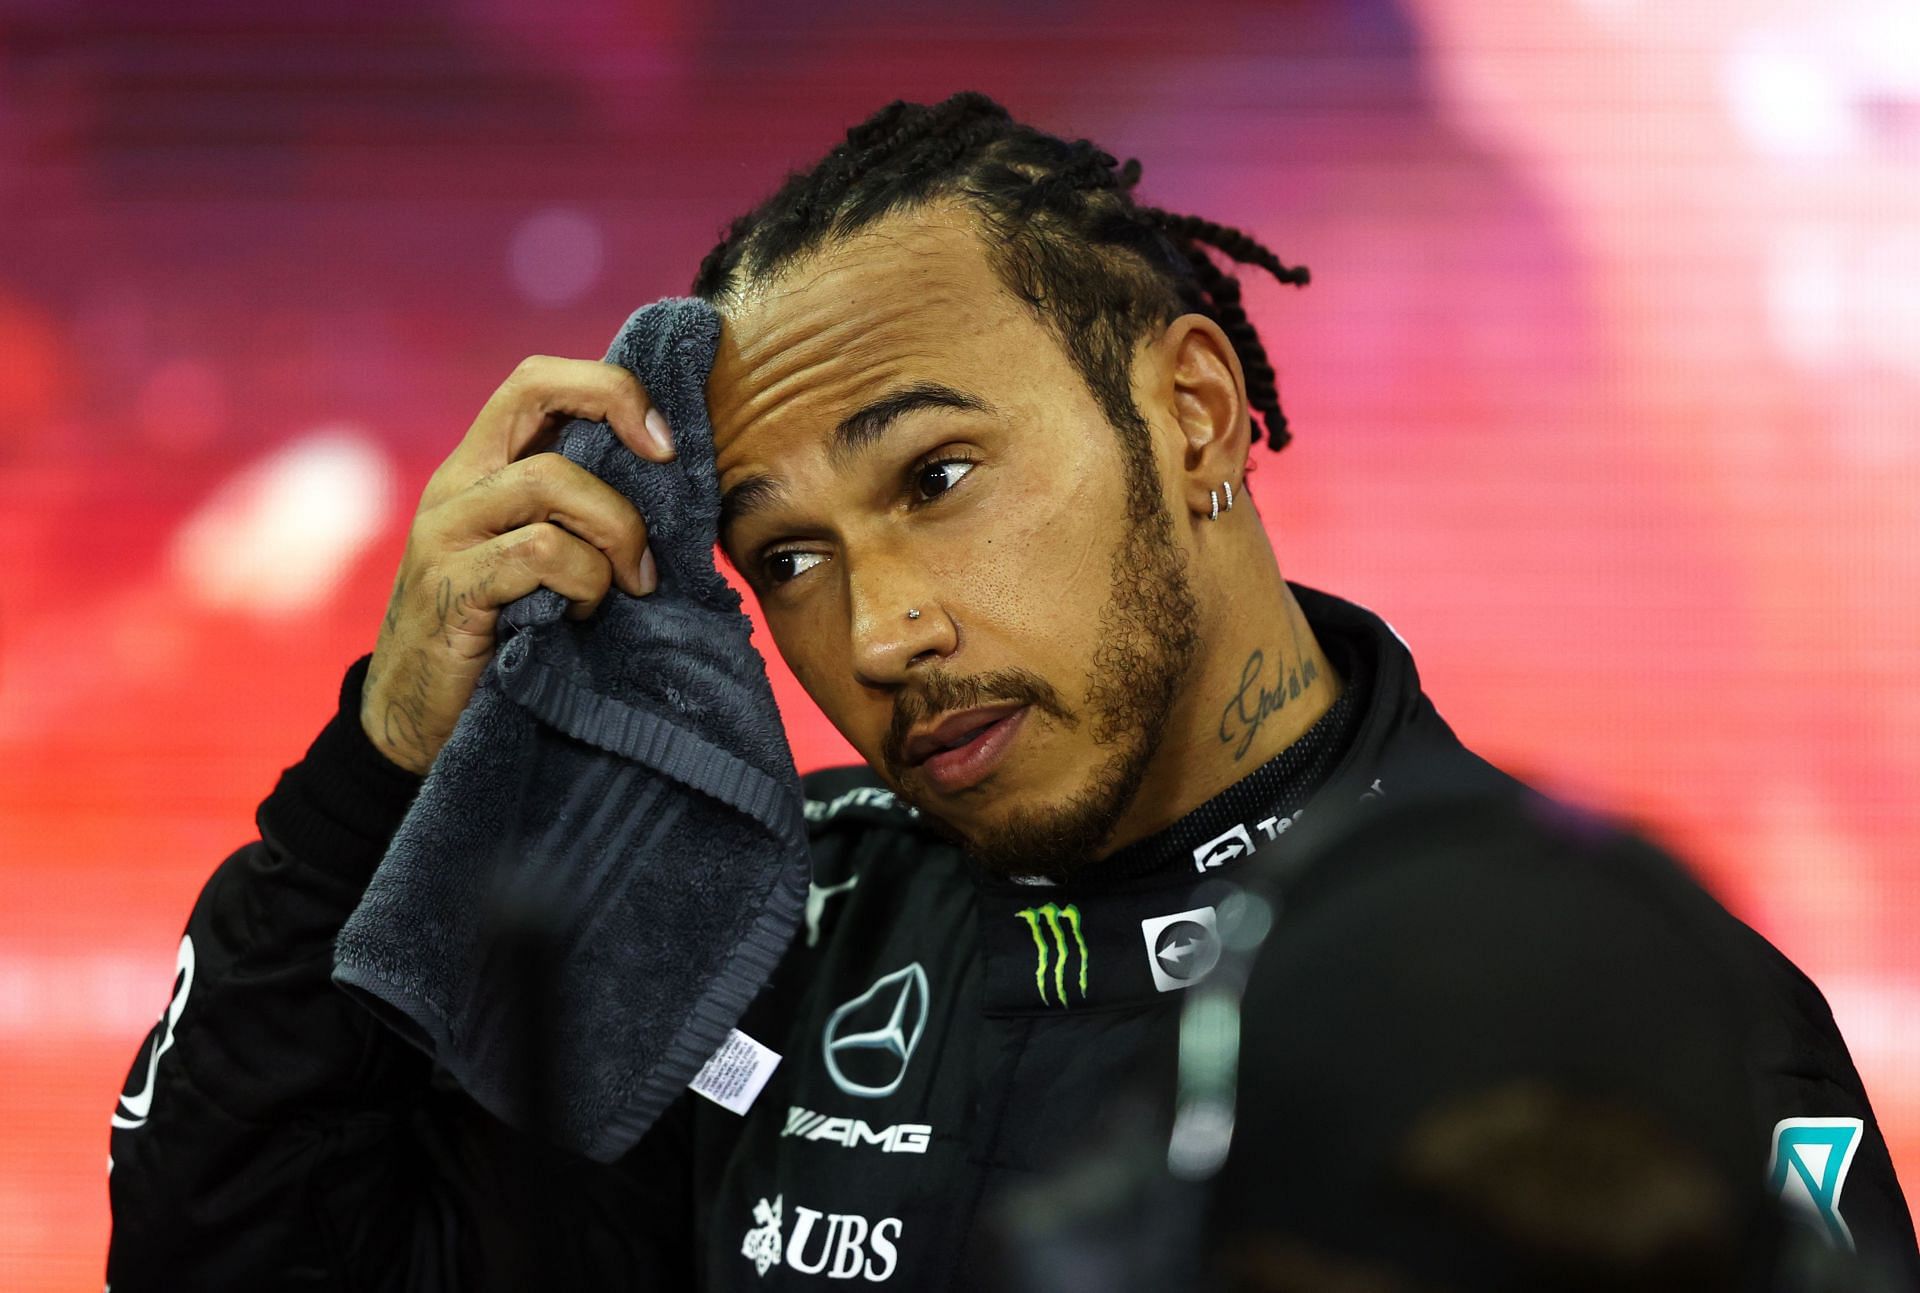 Lewis Hamilton during the post-race interview, 2021 Abu Dhabi Grand Prix